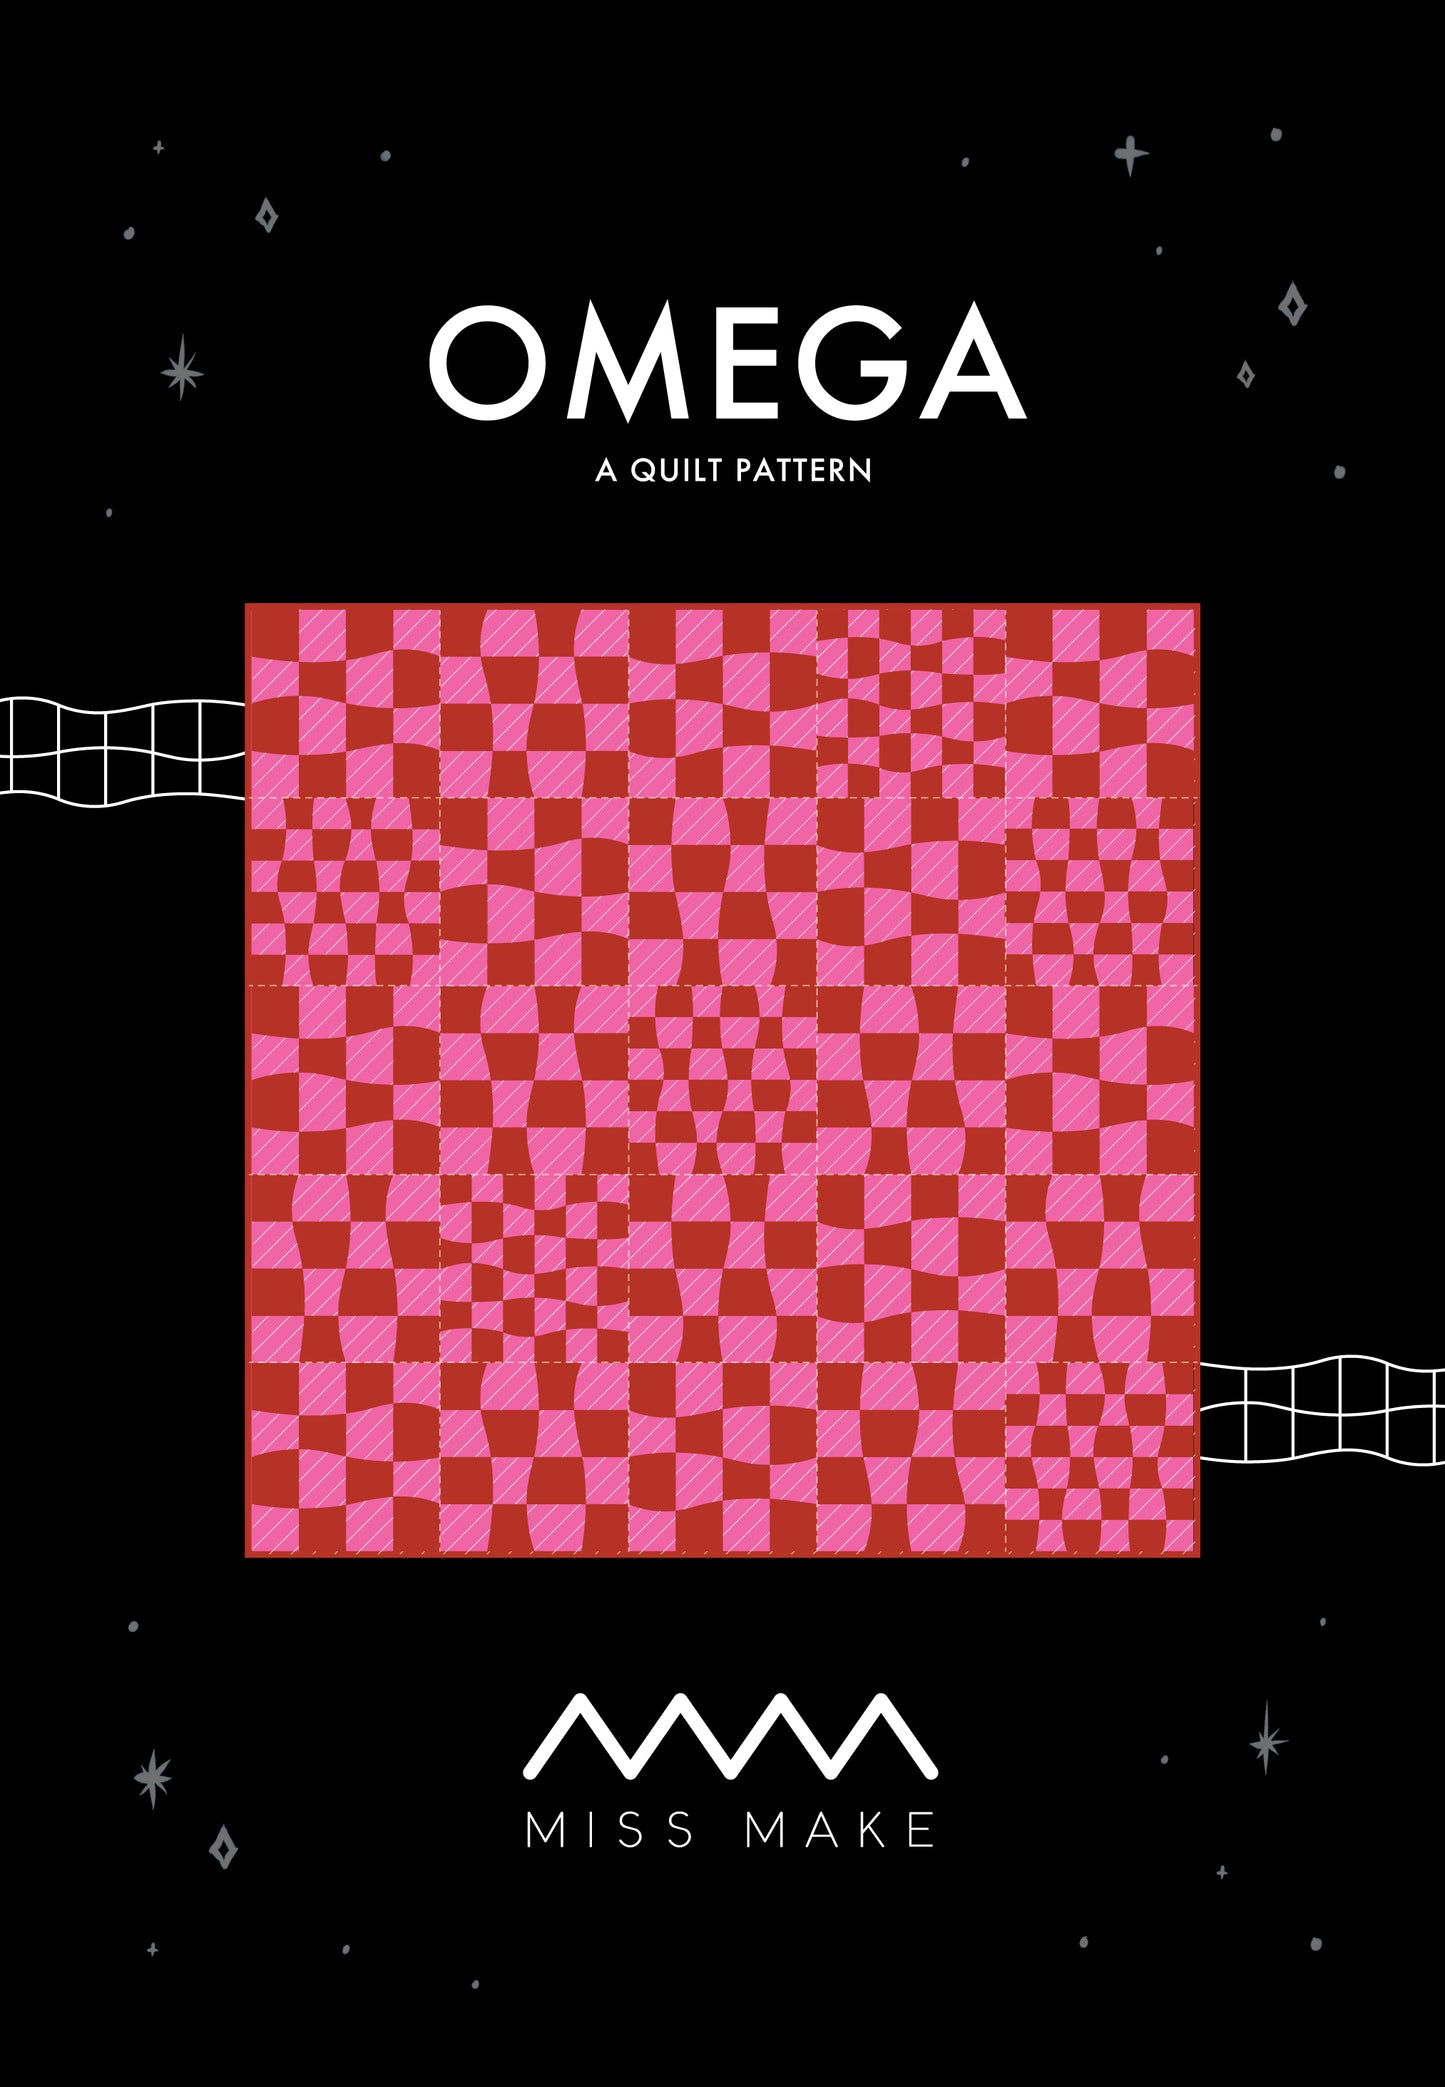 Omega Quilt Pattern by Miss Make - Sewfinity.com